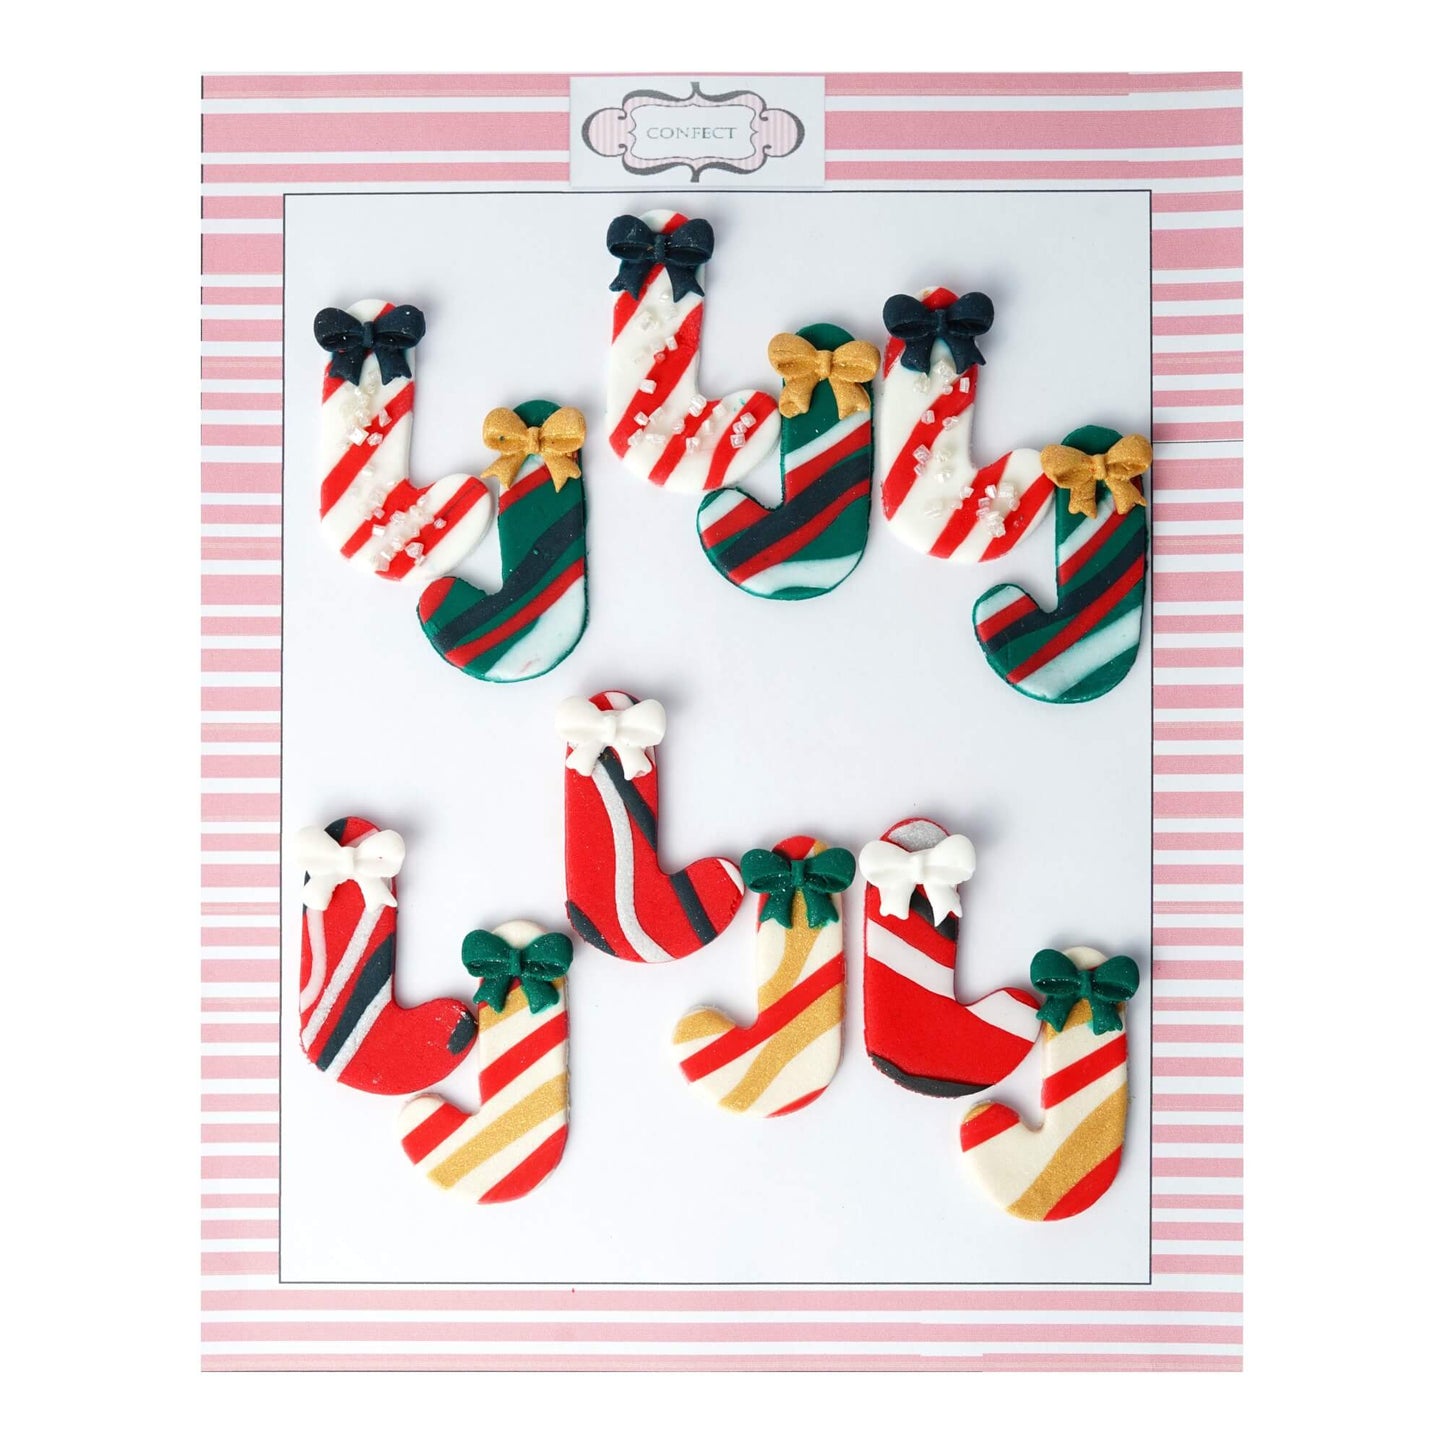 Confect Assorted Candy Cane CC 12 60 gms